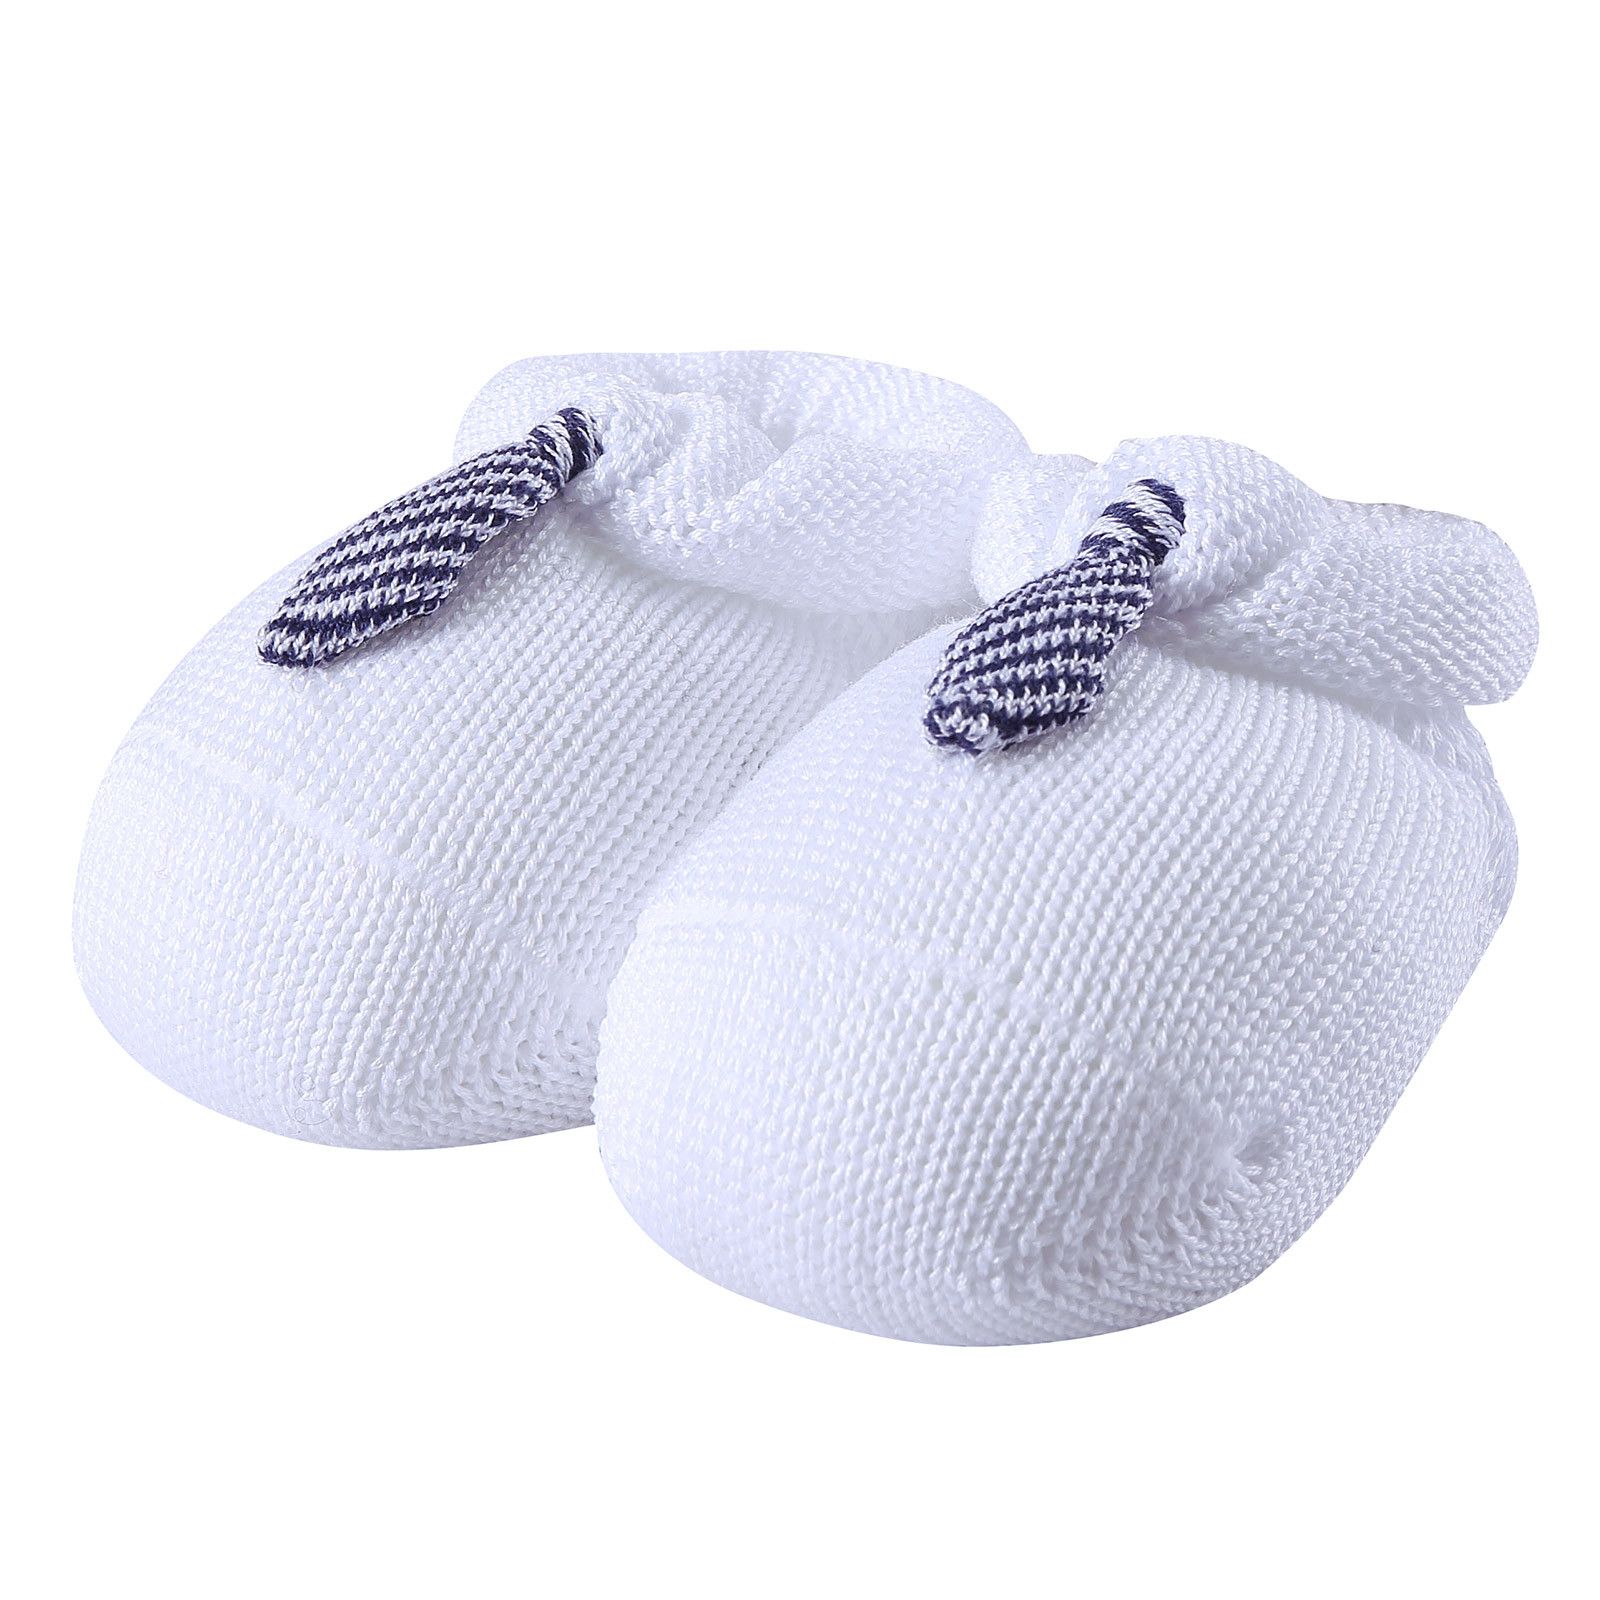 Baby White Knitted Cotton Shoes With Blue Tie Trims - CÉMAROSE | Children's Fashion Store - 1